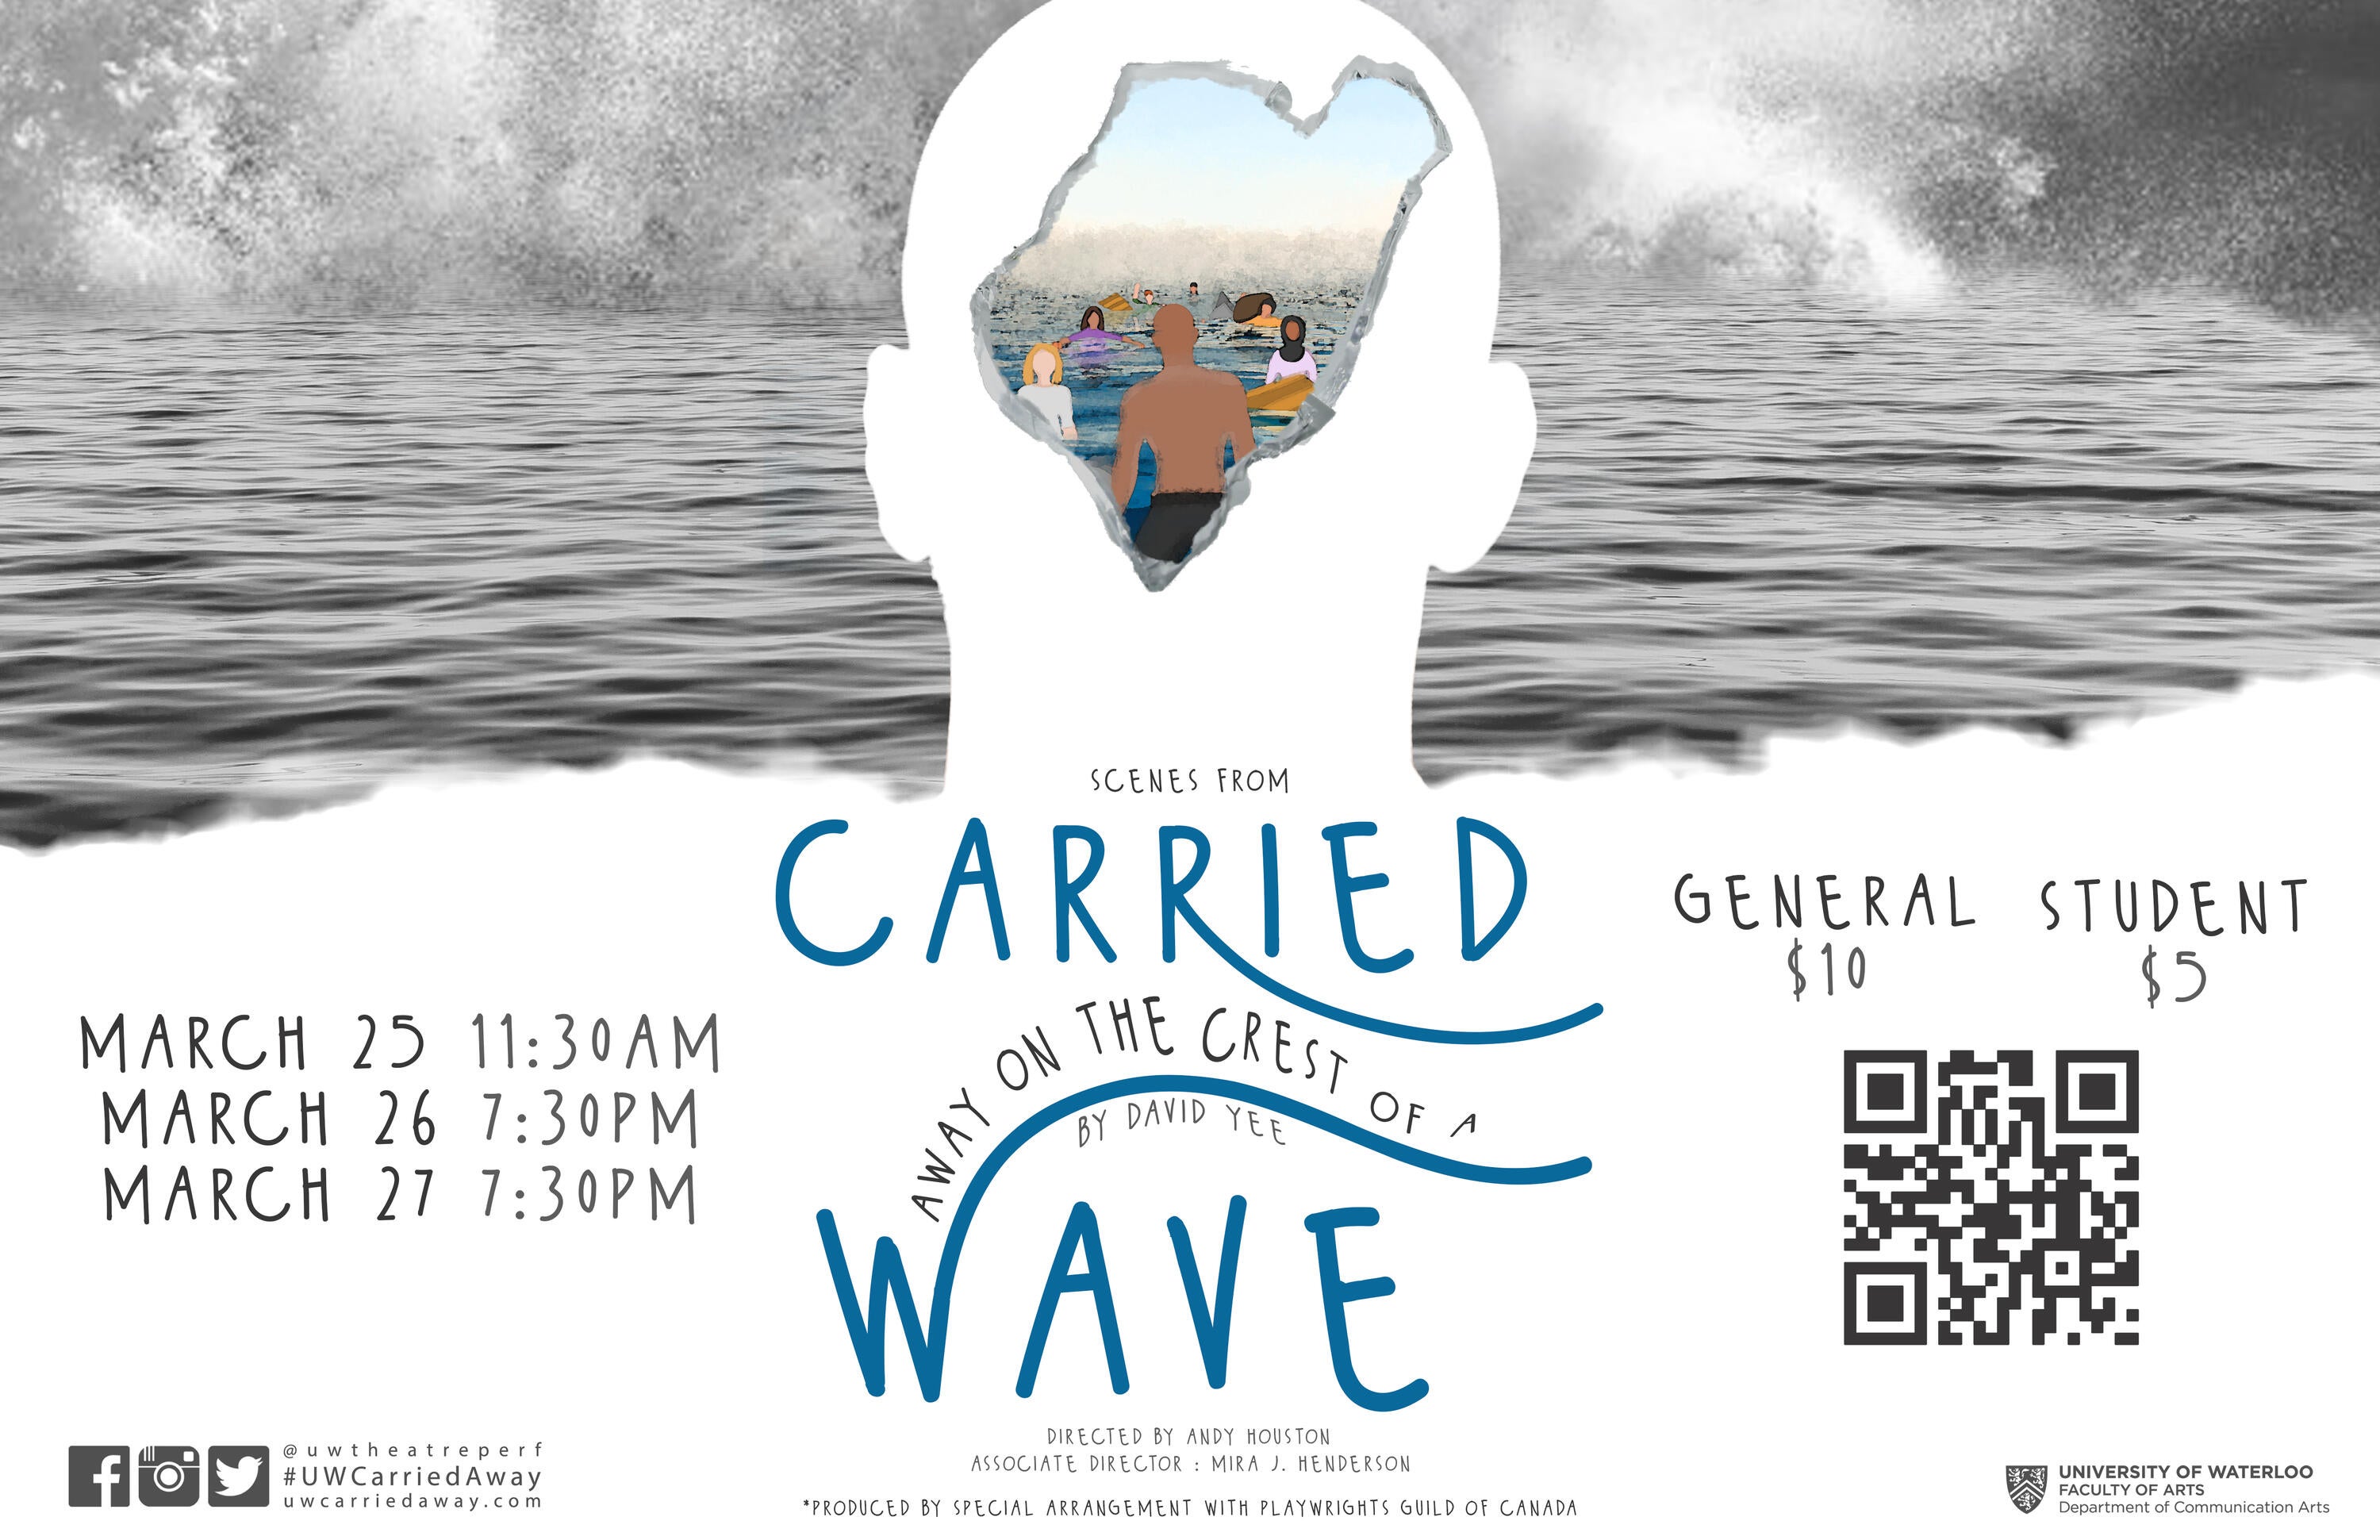 Scenes from carried away on the crest of a wave official poster